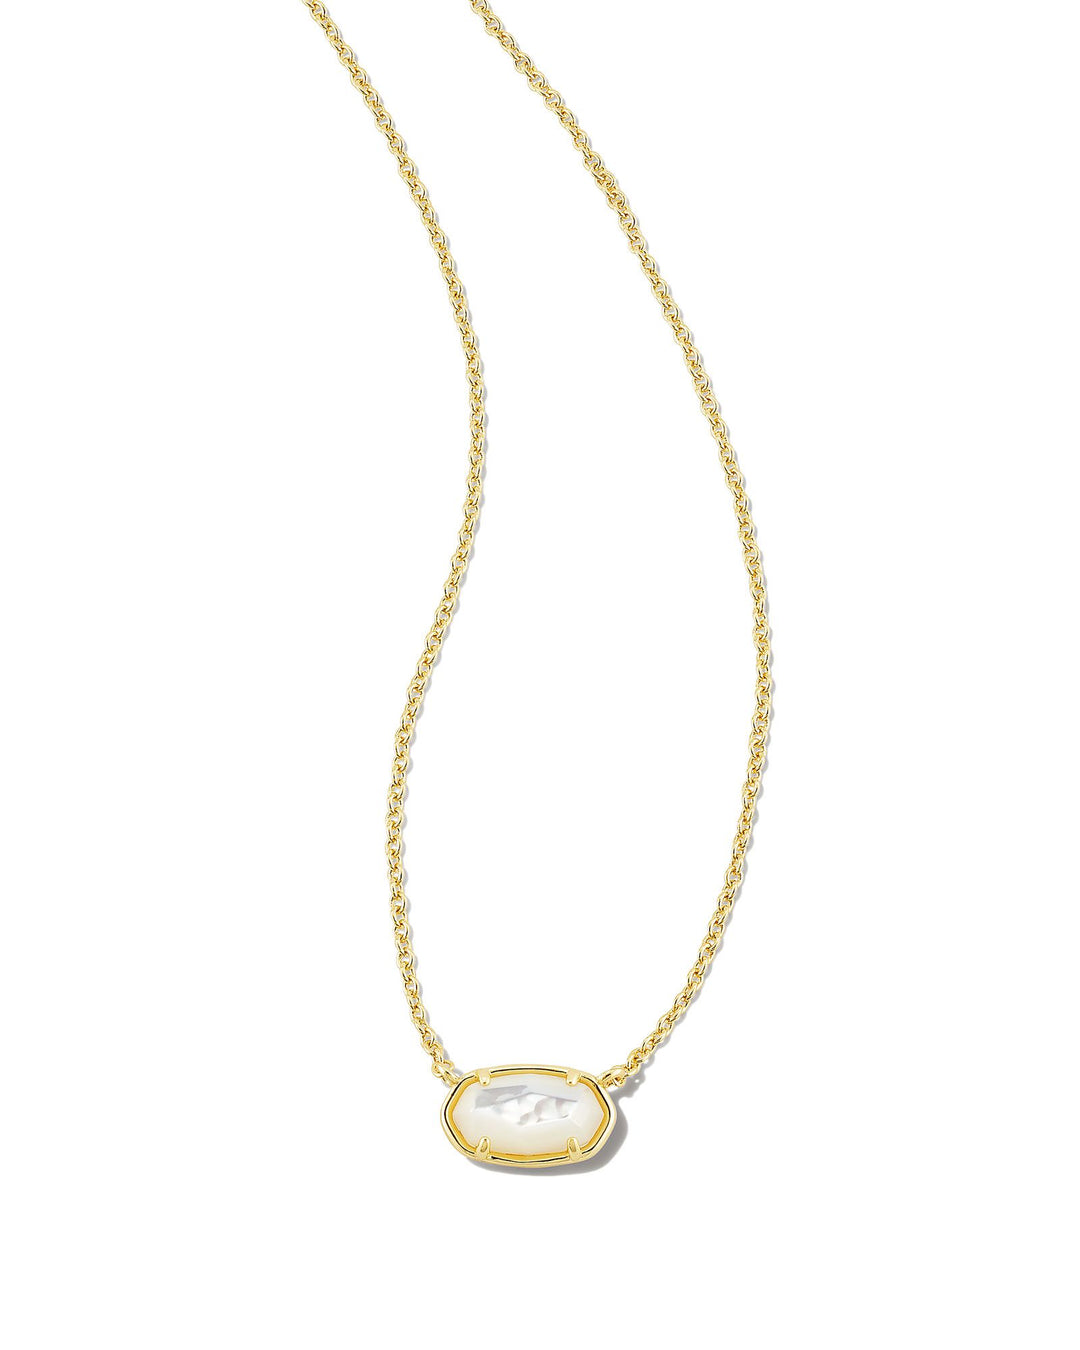 GRAYSON STONE PENDANT NECKLACE, GOLD IVORY MOTHER OF PEARL